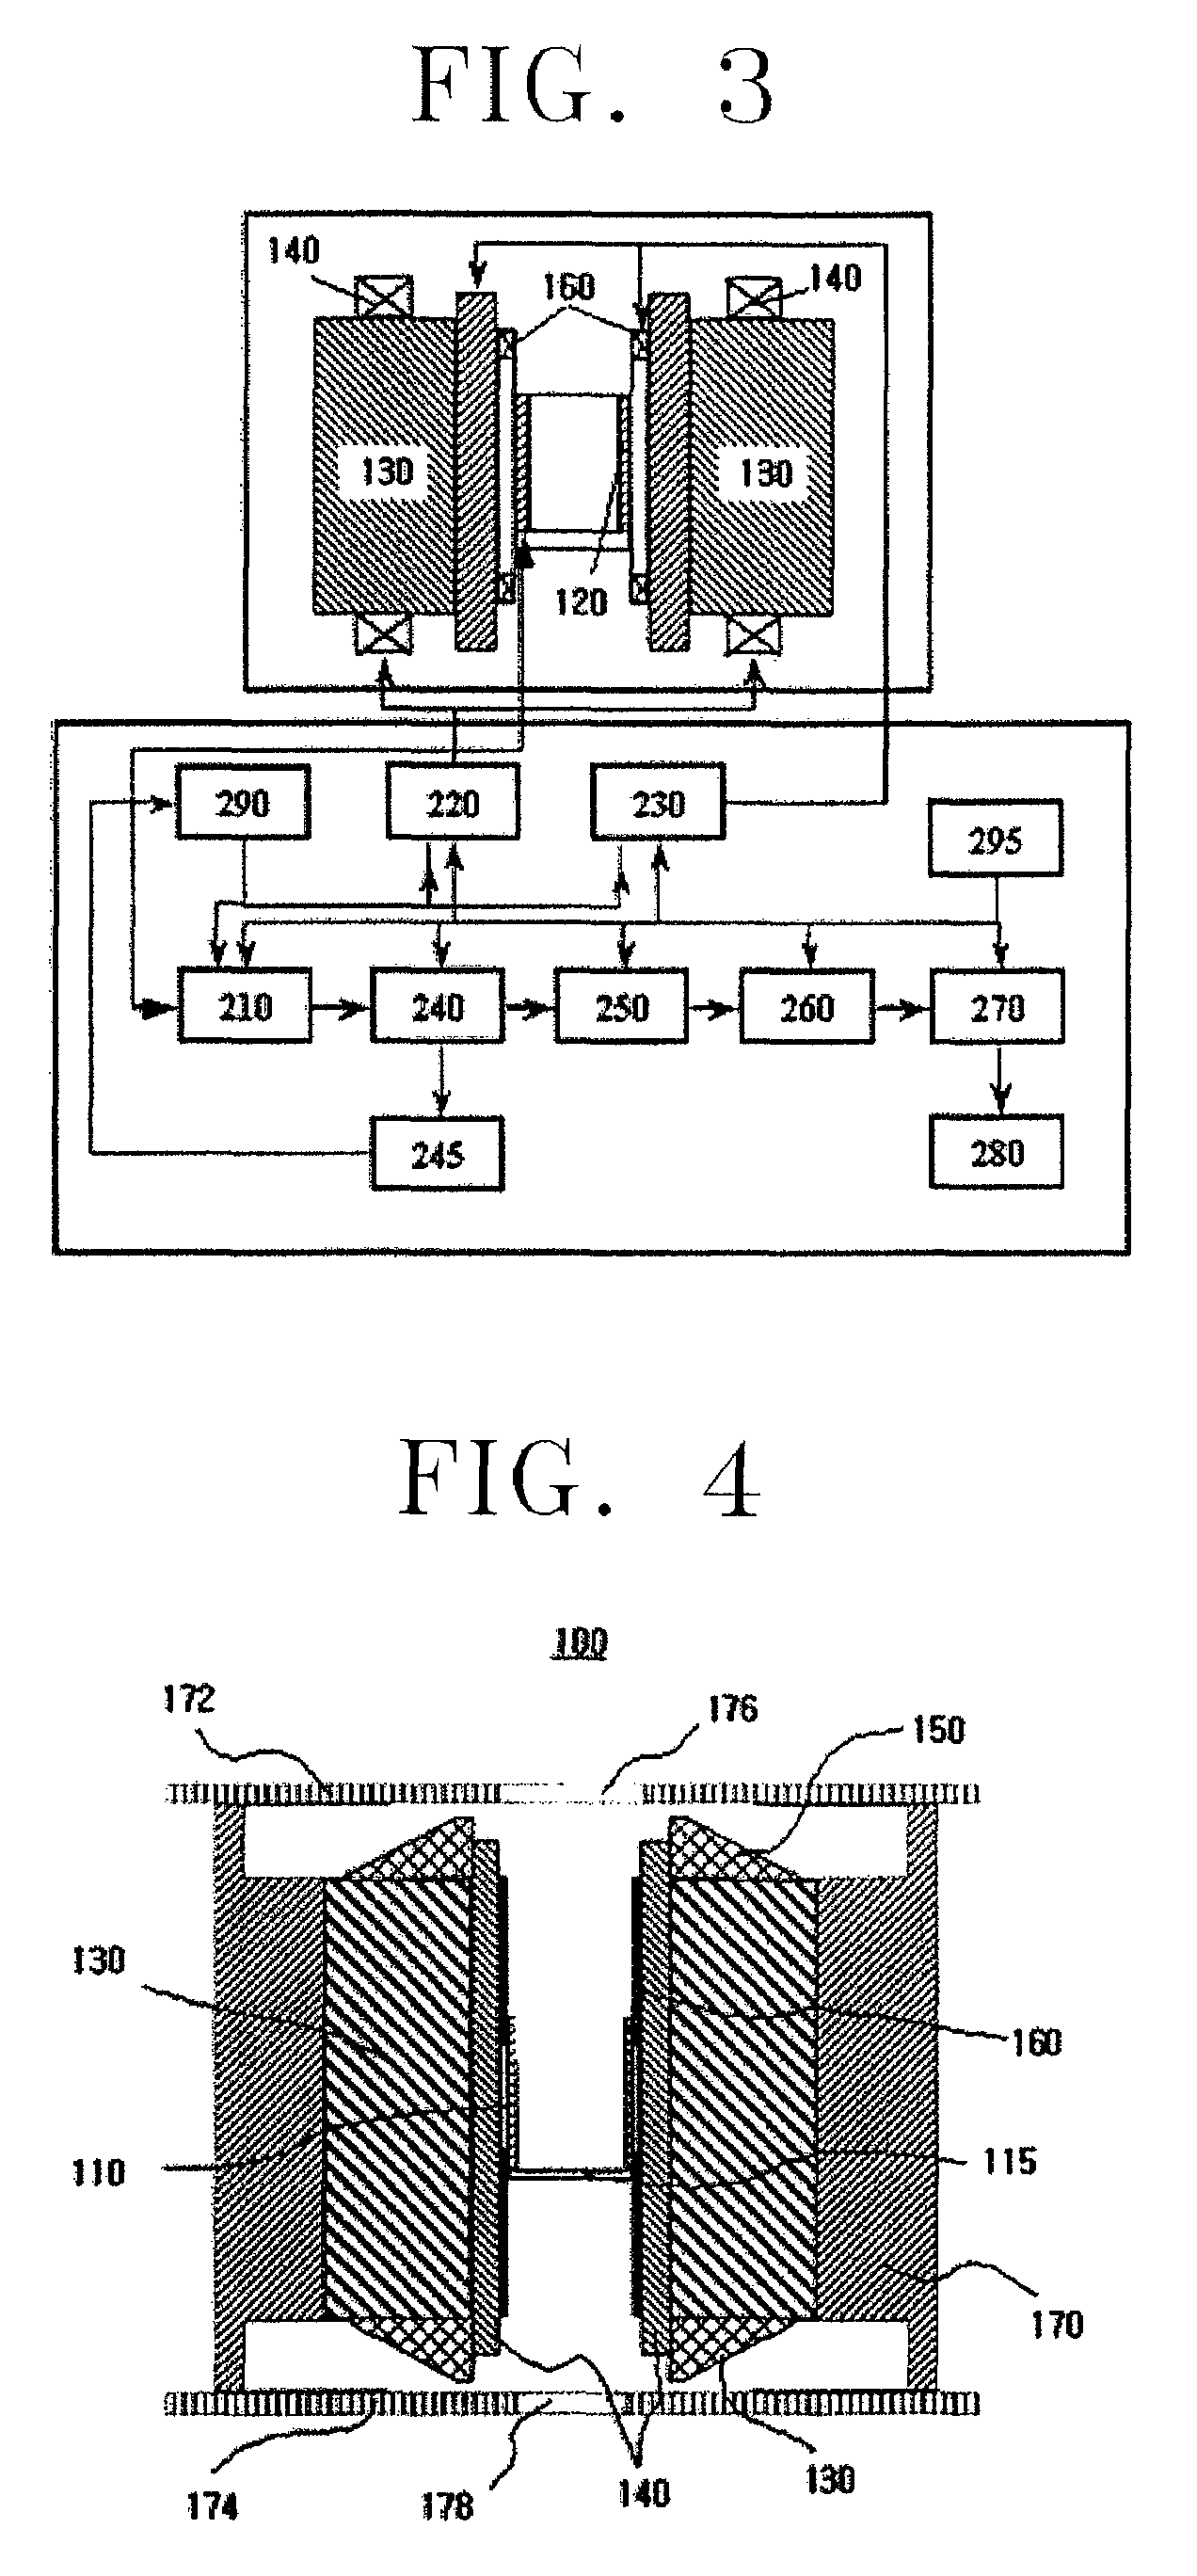 Non-invasive blood glucose sensors using a magneto-resonance absorption method and measurement methods thereof